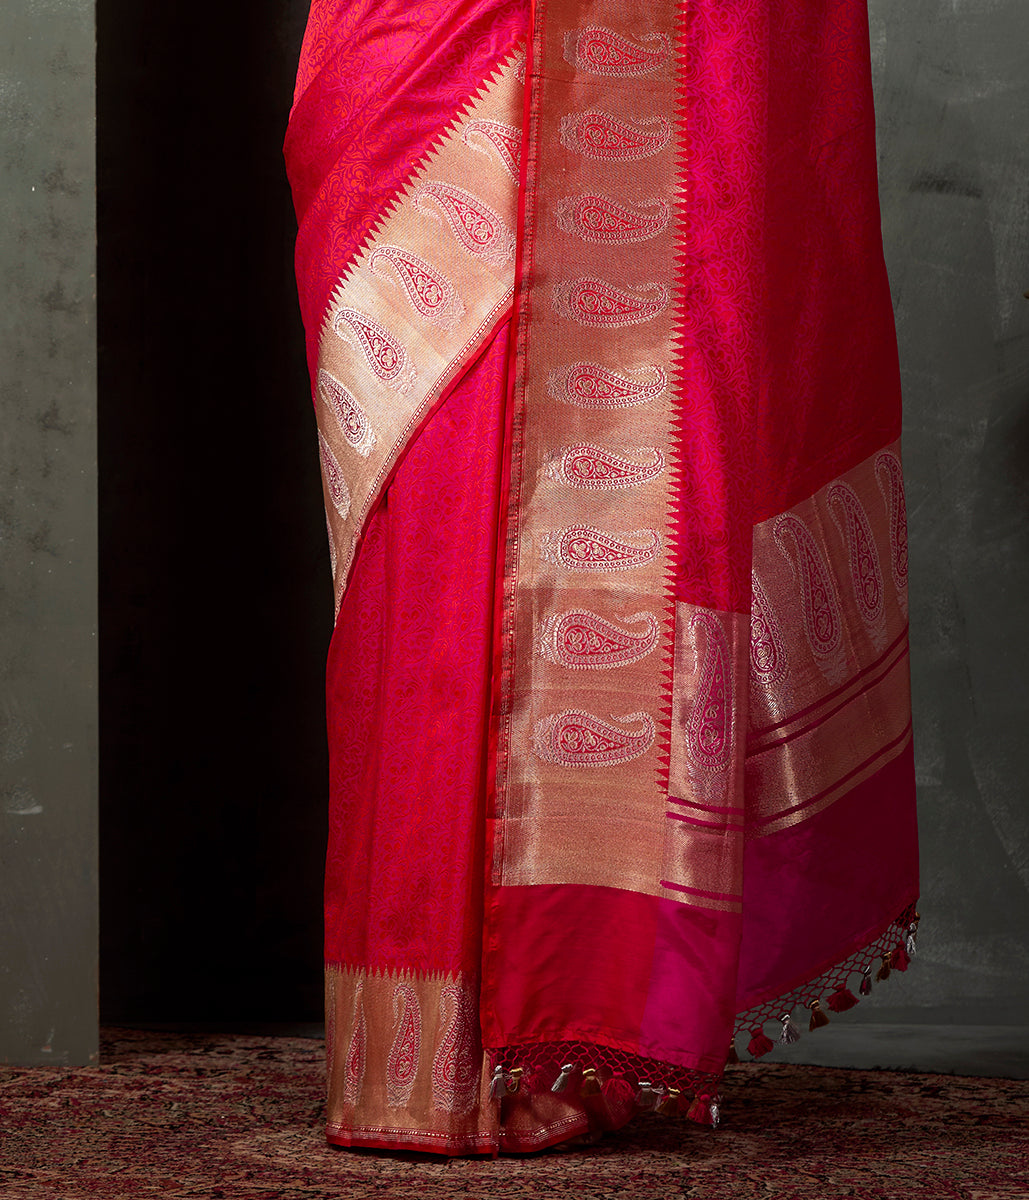 Hot_Pink_Self_Weave_Tanchoi_Saree_with_Gold_and_Silver_Zari_Paisleys_on_the_Border_WeaverStory_04